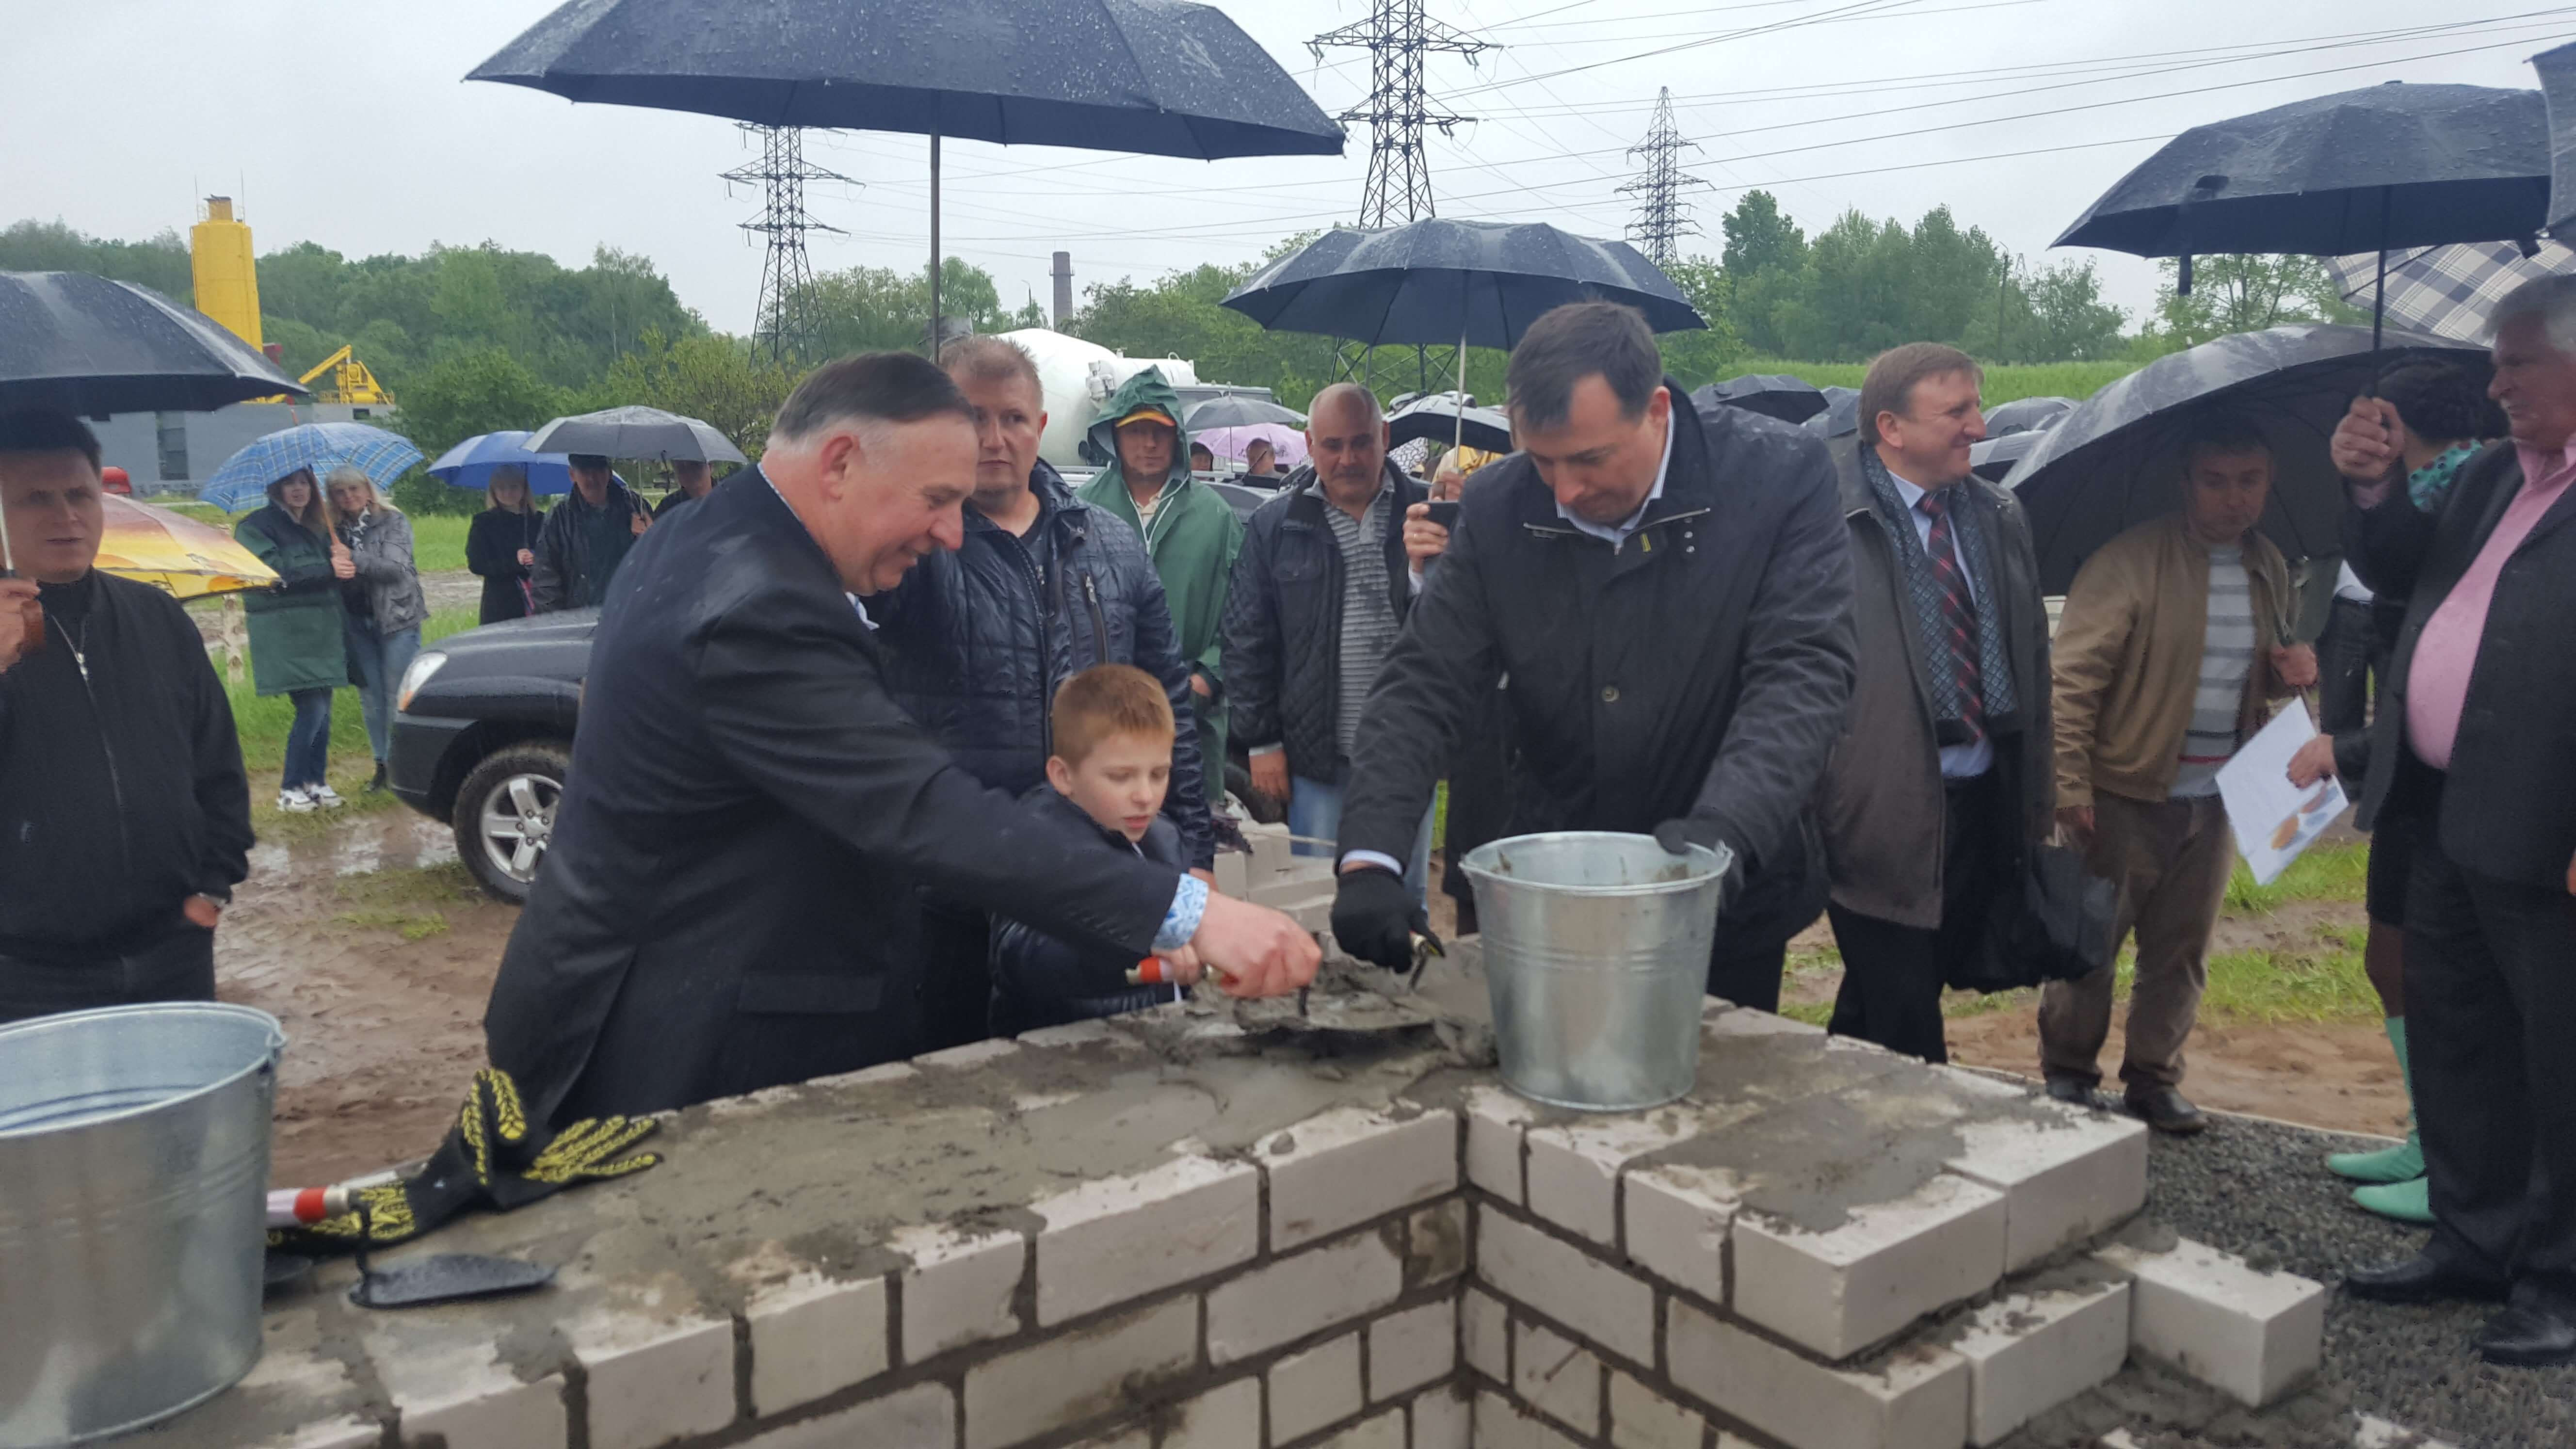 Founder of VIMAL group - Viktor Lazar together with the head of Chernihiv region Valerii Kulich are placing the first bricks of the new factory